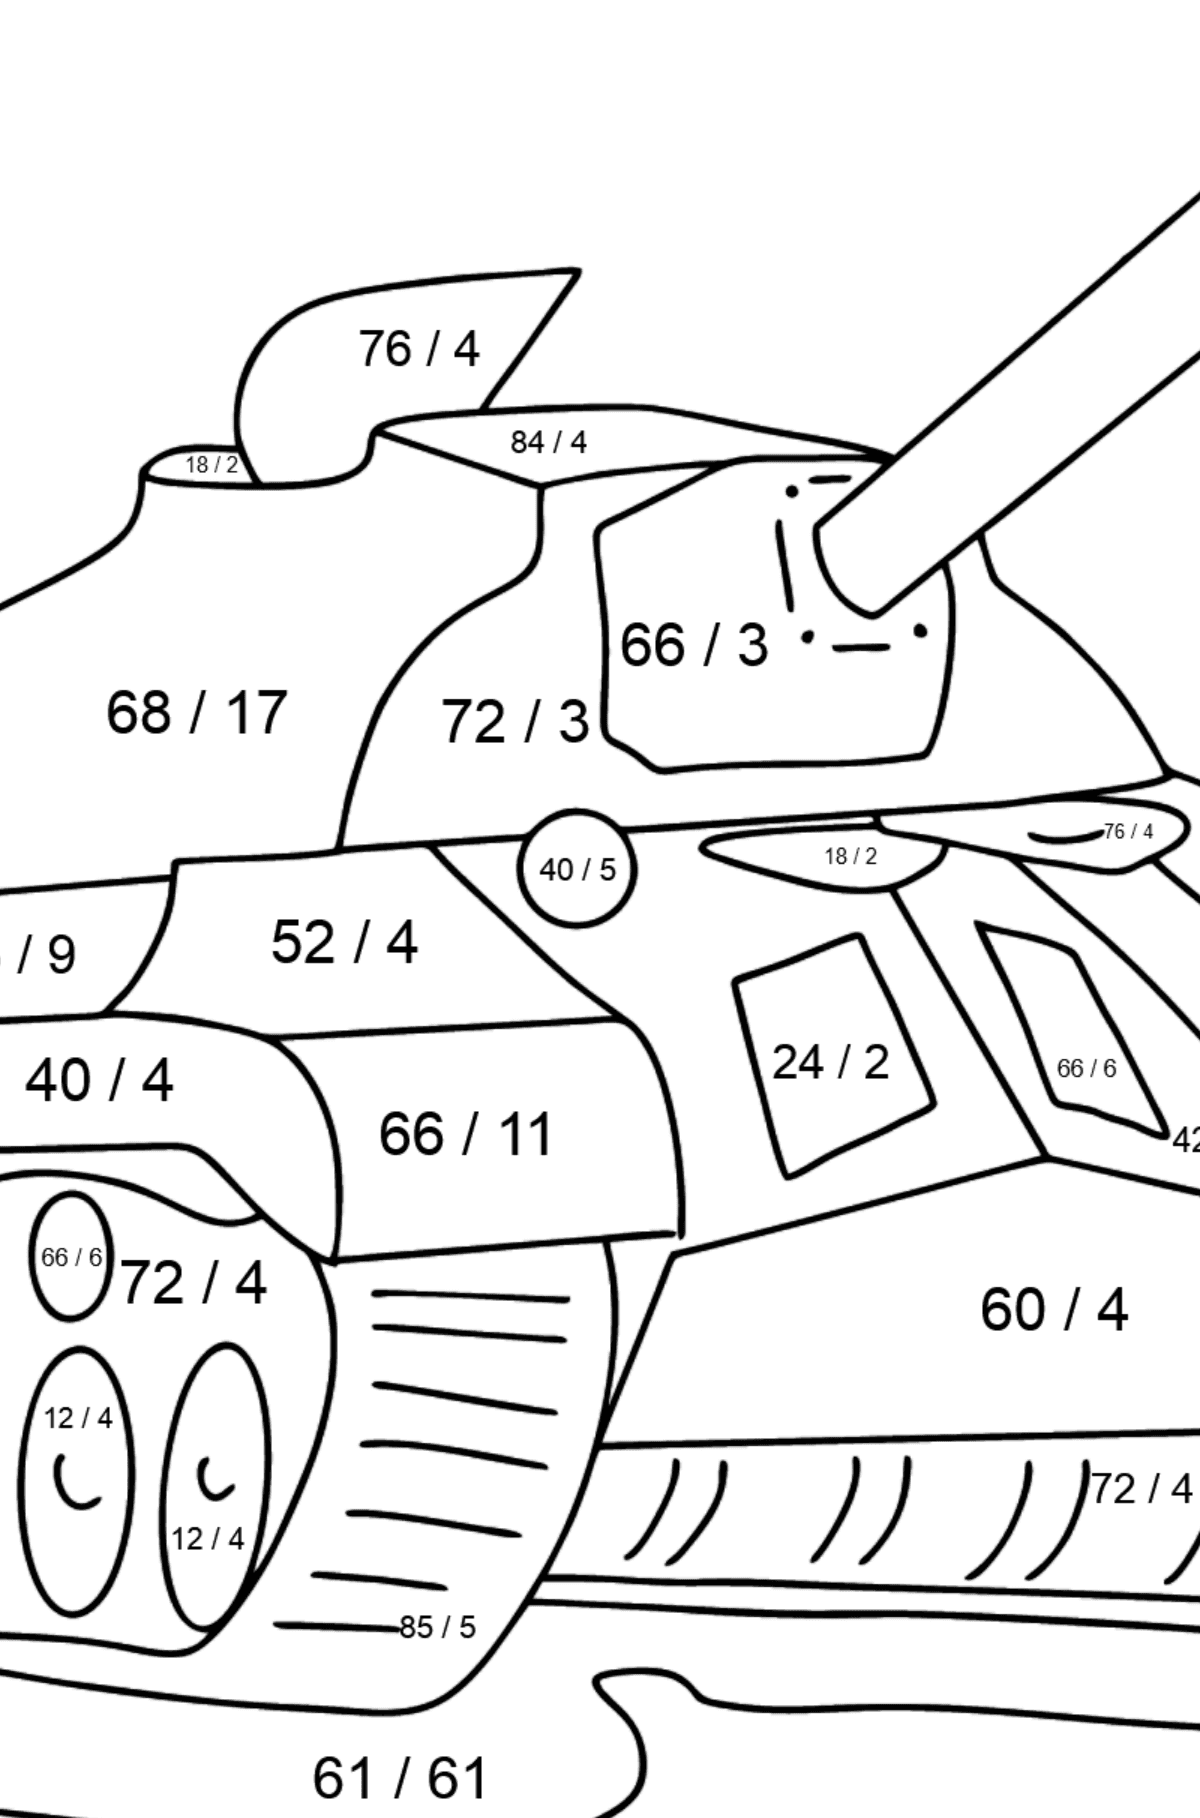 Tank IS 3 coloring page - Math Coloring - Division for Kids